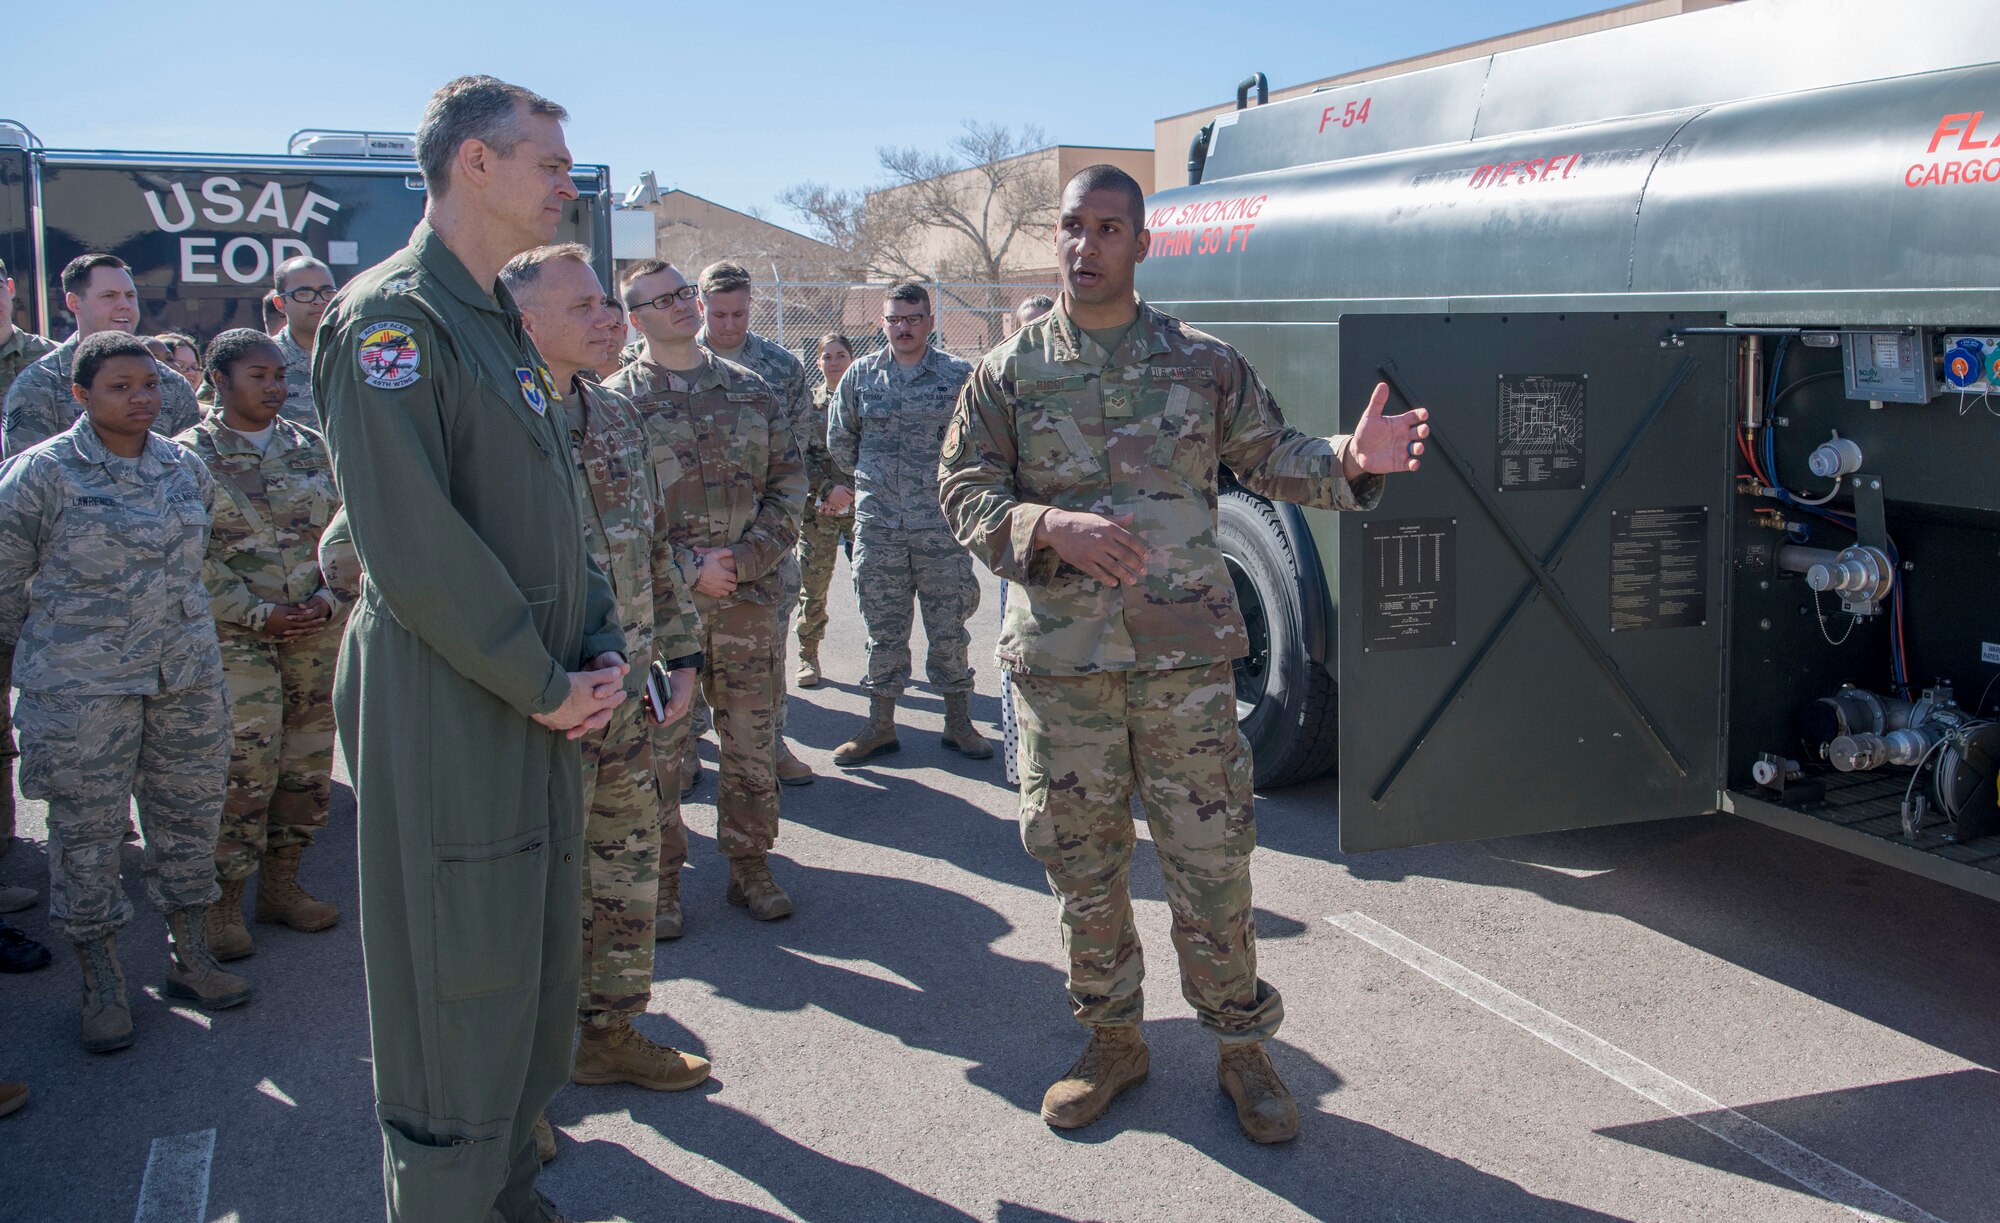 Maj. Gen. Craig Wills, 19th Air Force commander, is briefed on an R-13 Mobile Refueling Unit by Senior Airman Michael Ricci, 49th Logistics Readiness Squadron preventive maintenance technician, Feb. 14, 2020, on Holloman Air Force Base, N.M. Ricci fitted an adapter and nozzle on the R-13 to prevent fuel commingling, which is the mixing of two separate products, such as gasoline in an aircraft or jet fuel into diesel vehicle. (U.S. Air Force photo by Airman 1st Class Quion Lowe)